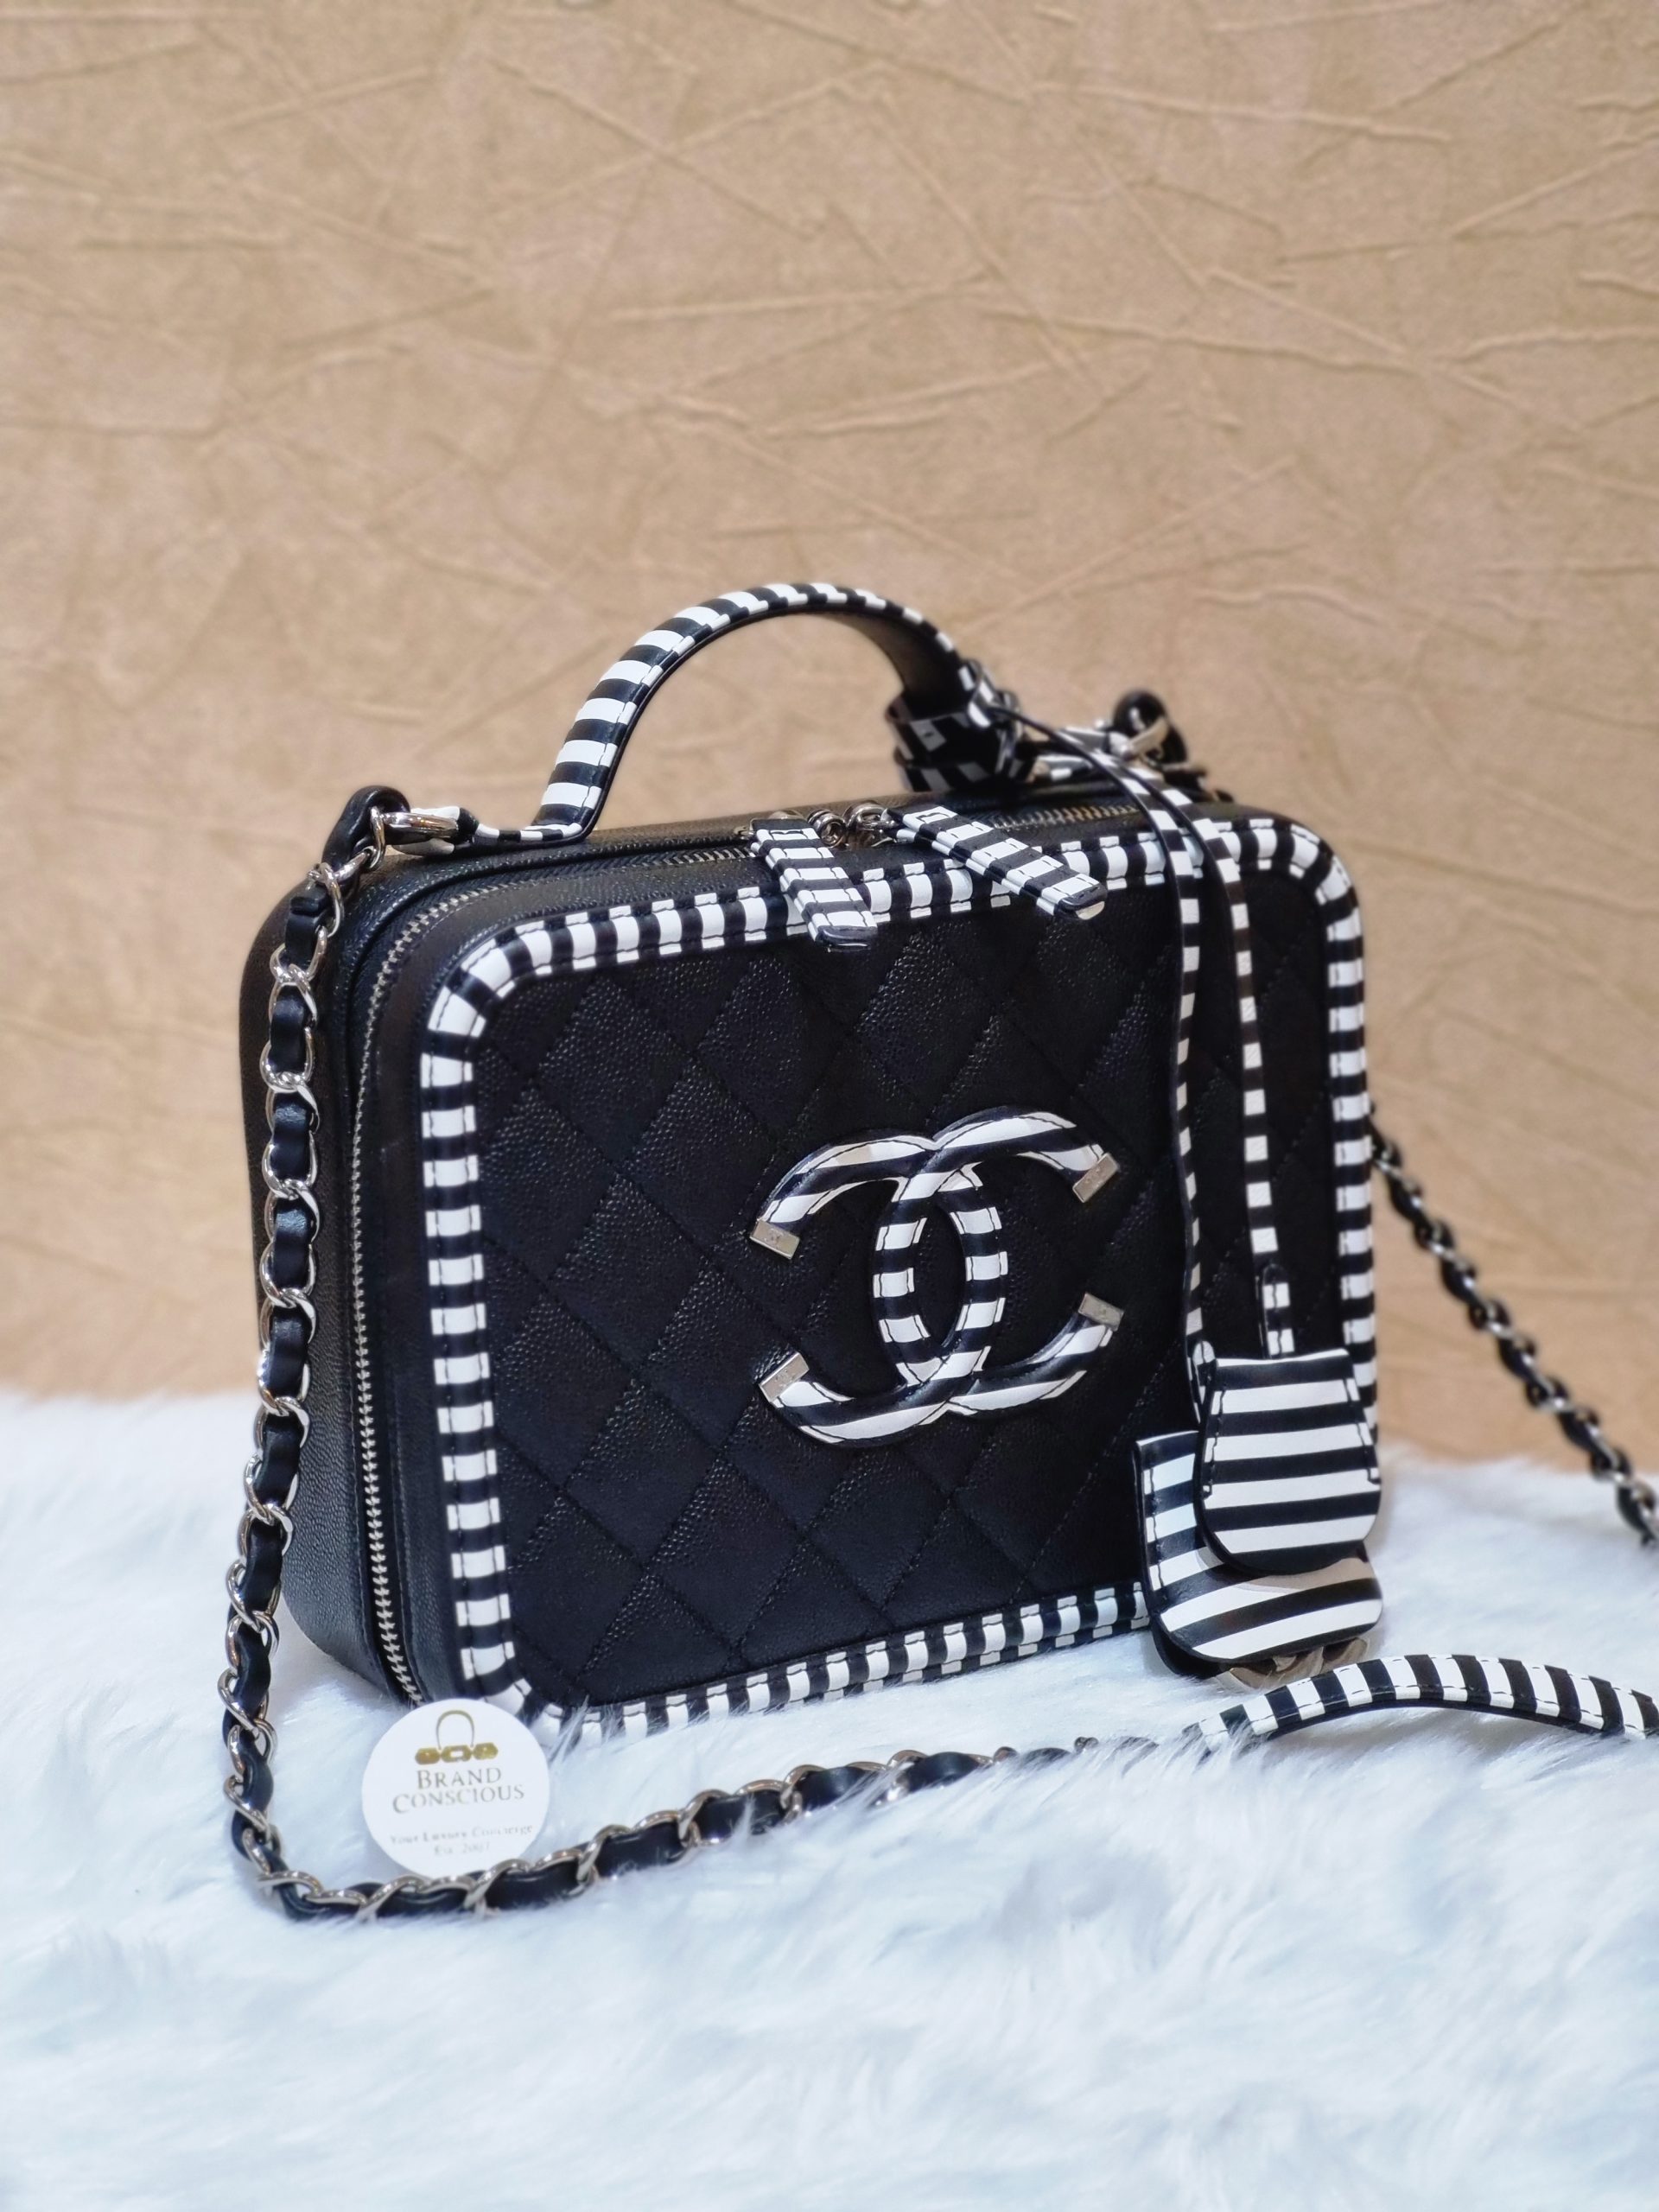 Chanel Classic Double Flap Bag Quilted Lambskin Medium Black 1900895